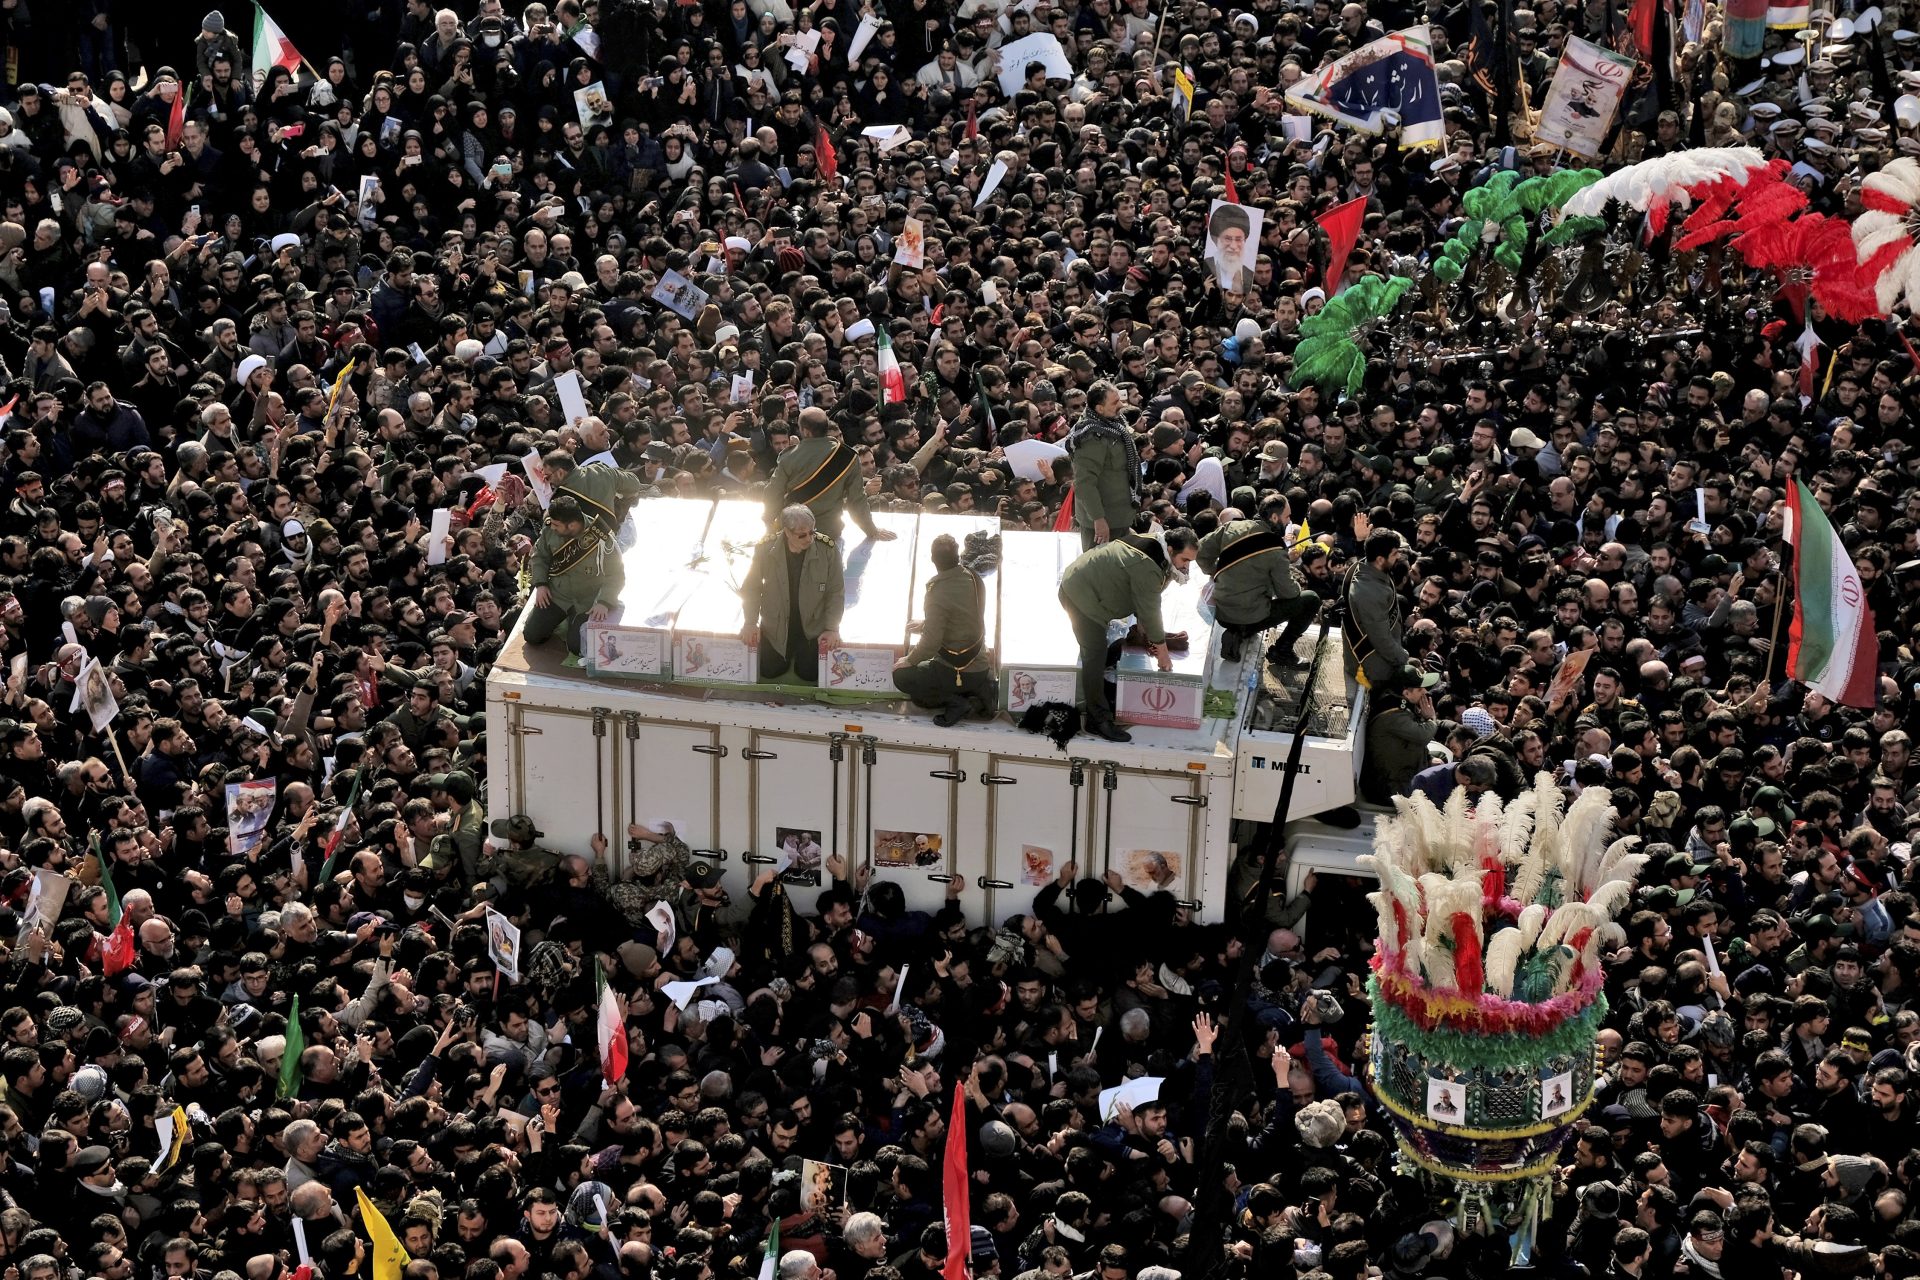 Coffins of Gen. Qassem Soleimani and others who were killed in Iraq by a U.S. drone strike, are carried on a truck surrounded by mourners during a funeral procession, at the Enqelab-e-Eslami (Islamic Revolution) square in Tehran, Iran, Monday, Jan. 6, 2020. The processions mark the first time Iran honored a single man with a multi-city ceremony. Not even Ayatollah Ruhollah Khomeini, who founded the Islamic Republic, received such a processional with his death in 1989. Soleimani on Monday will lie in state at Tehran's famed Musalla mosque as the revolutionary leader did before him.